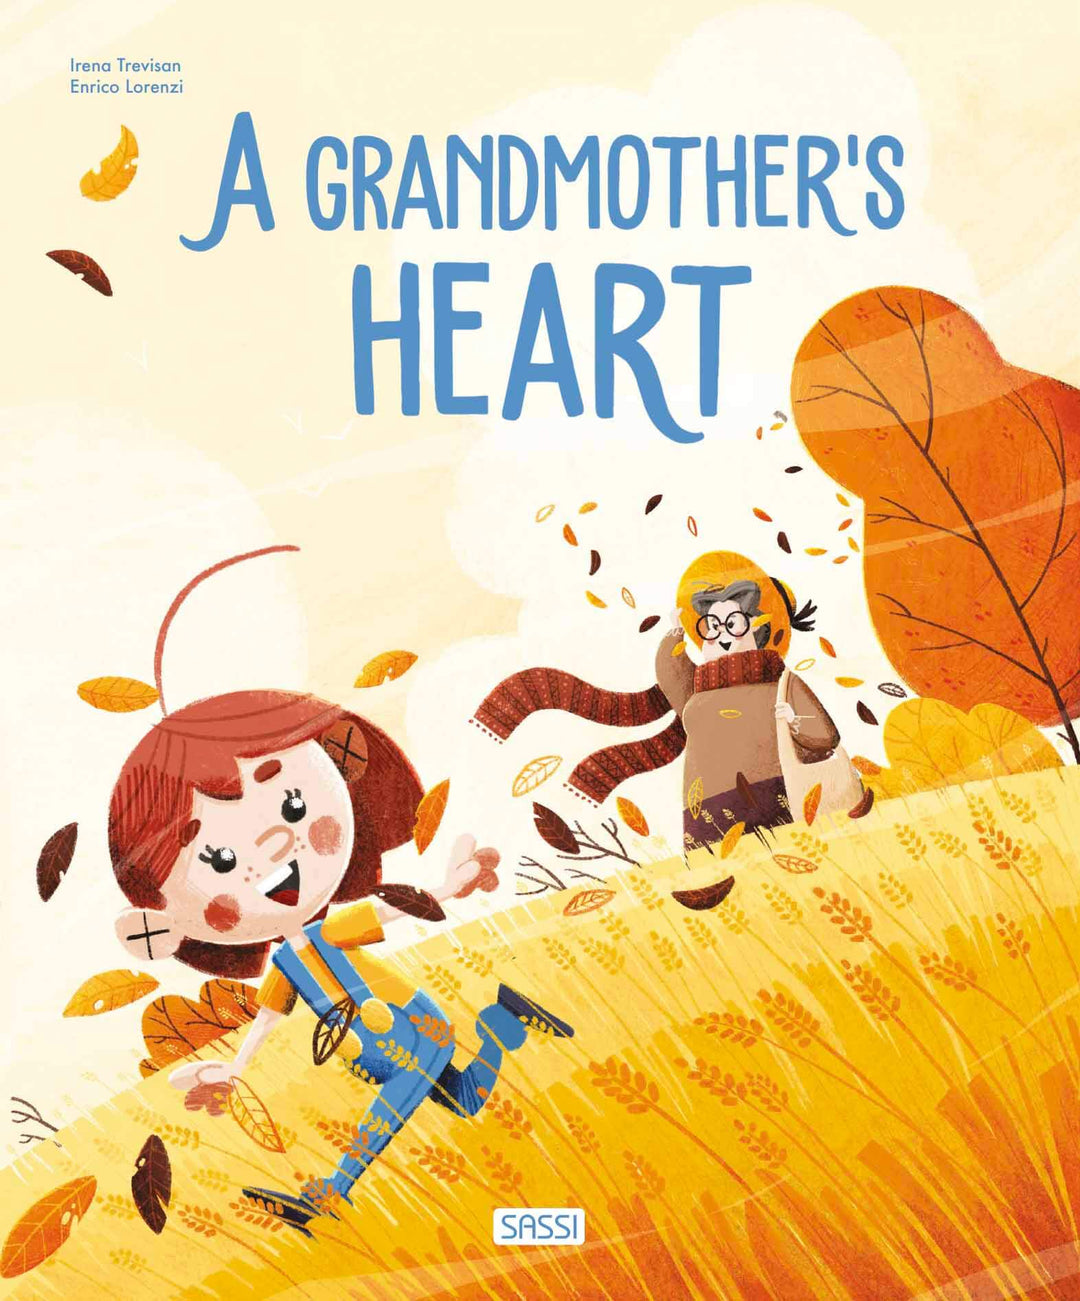 Sassi Story Book - A Grandmother's Heart